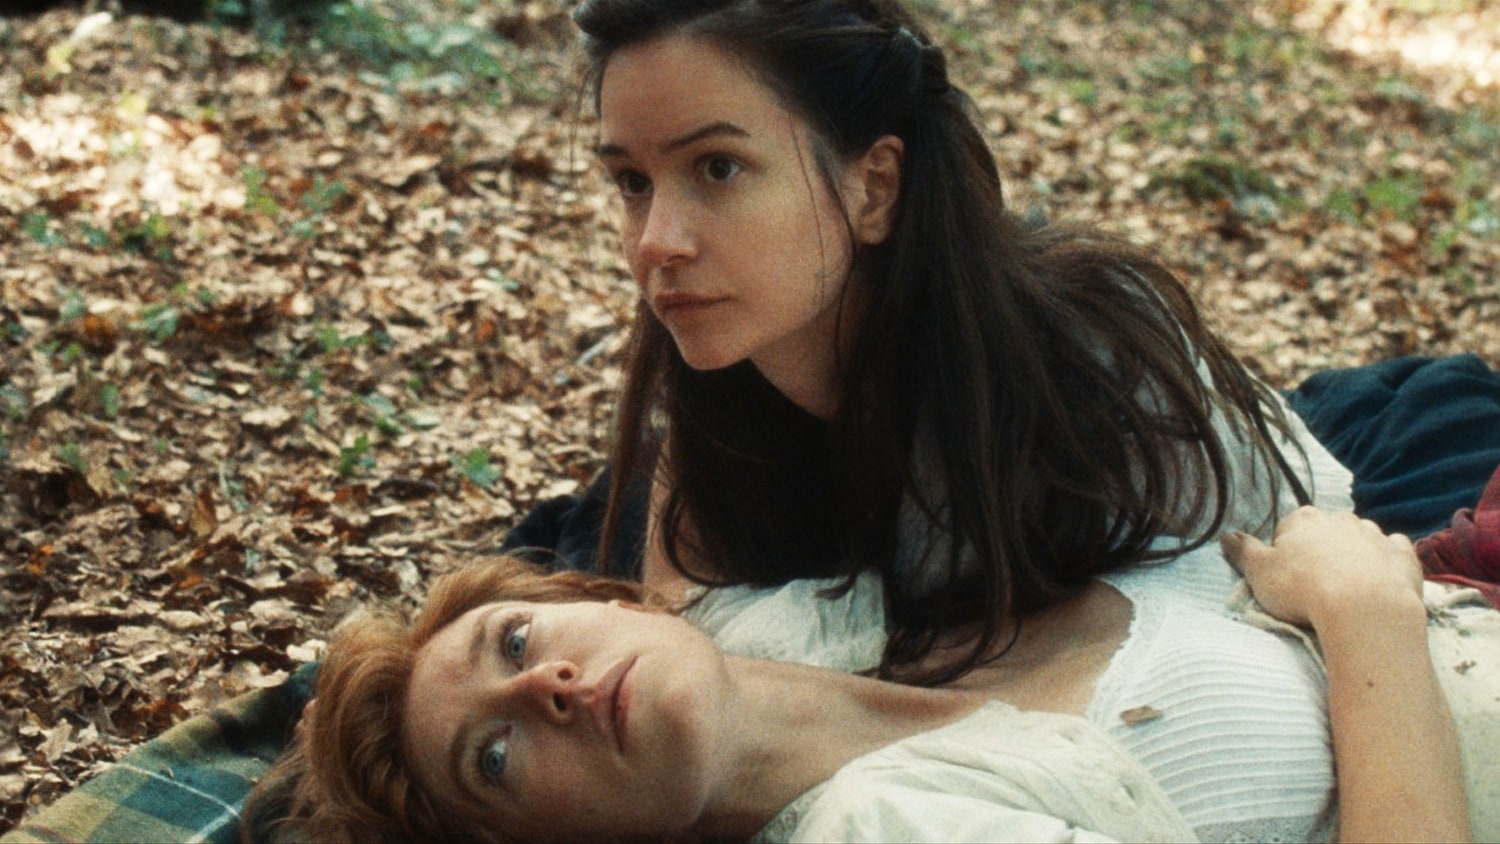 The World to Come star on complexity of portraying a 19th century lesbian romance